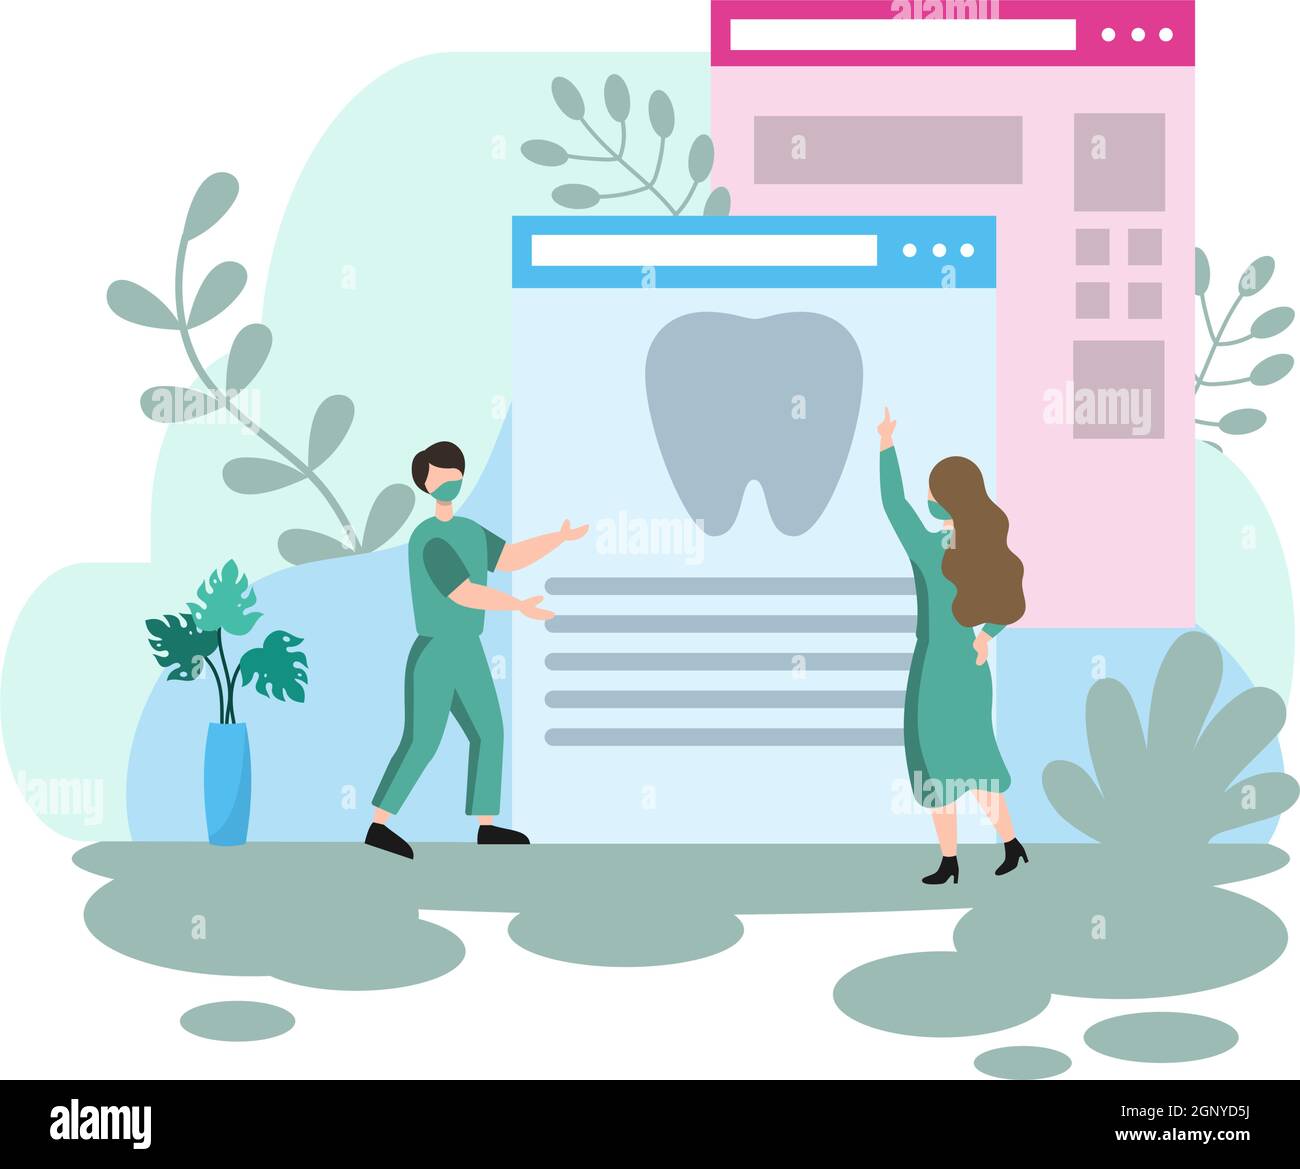 Dental Office Flat Color Illustration. Hospital interior with Workplace, Equipment, Instruments, Consultation, Treatment and Diagnosis Stock Vector